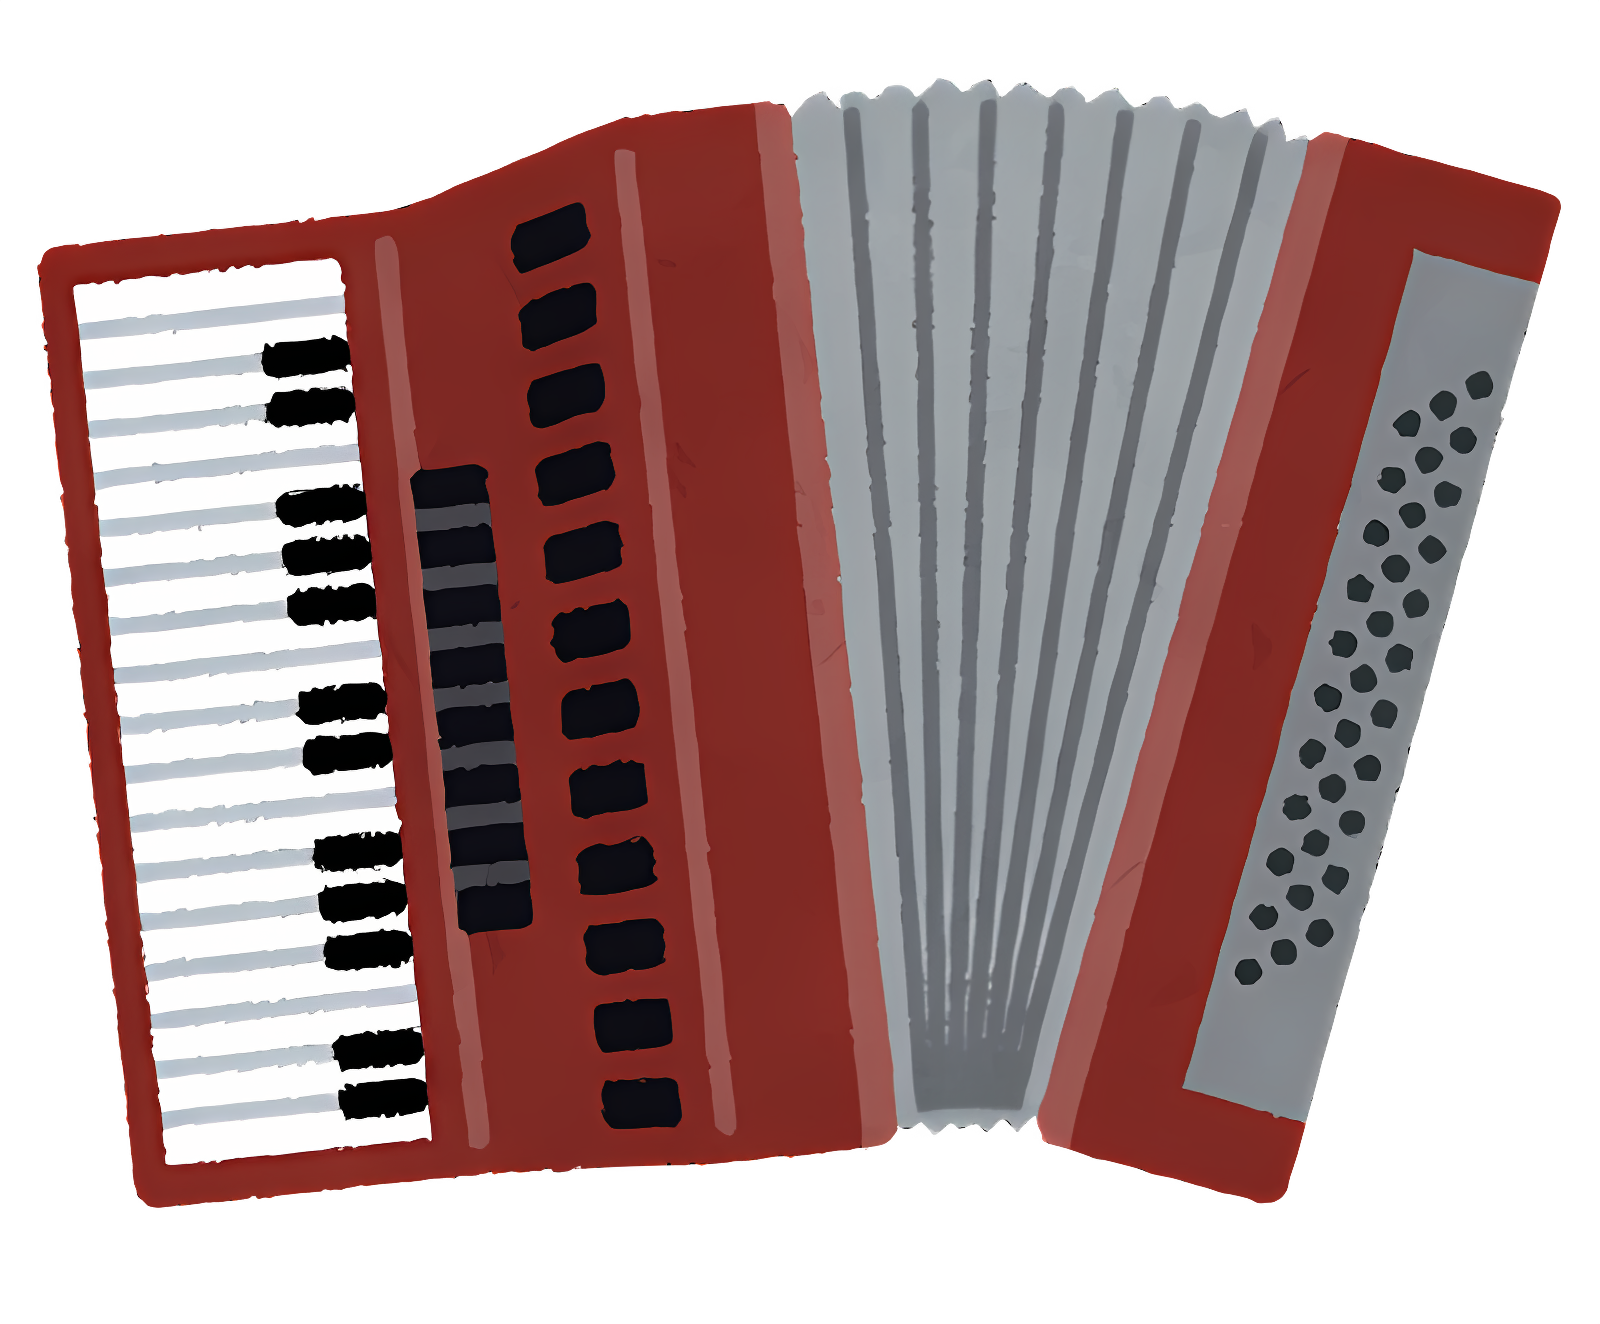 Accordion illustration with red body and black keys Clipart